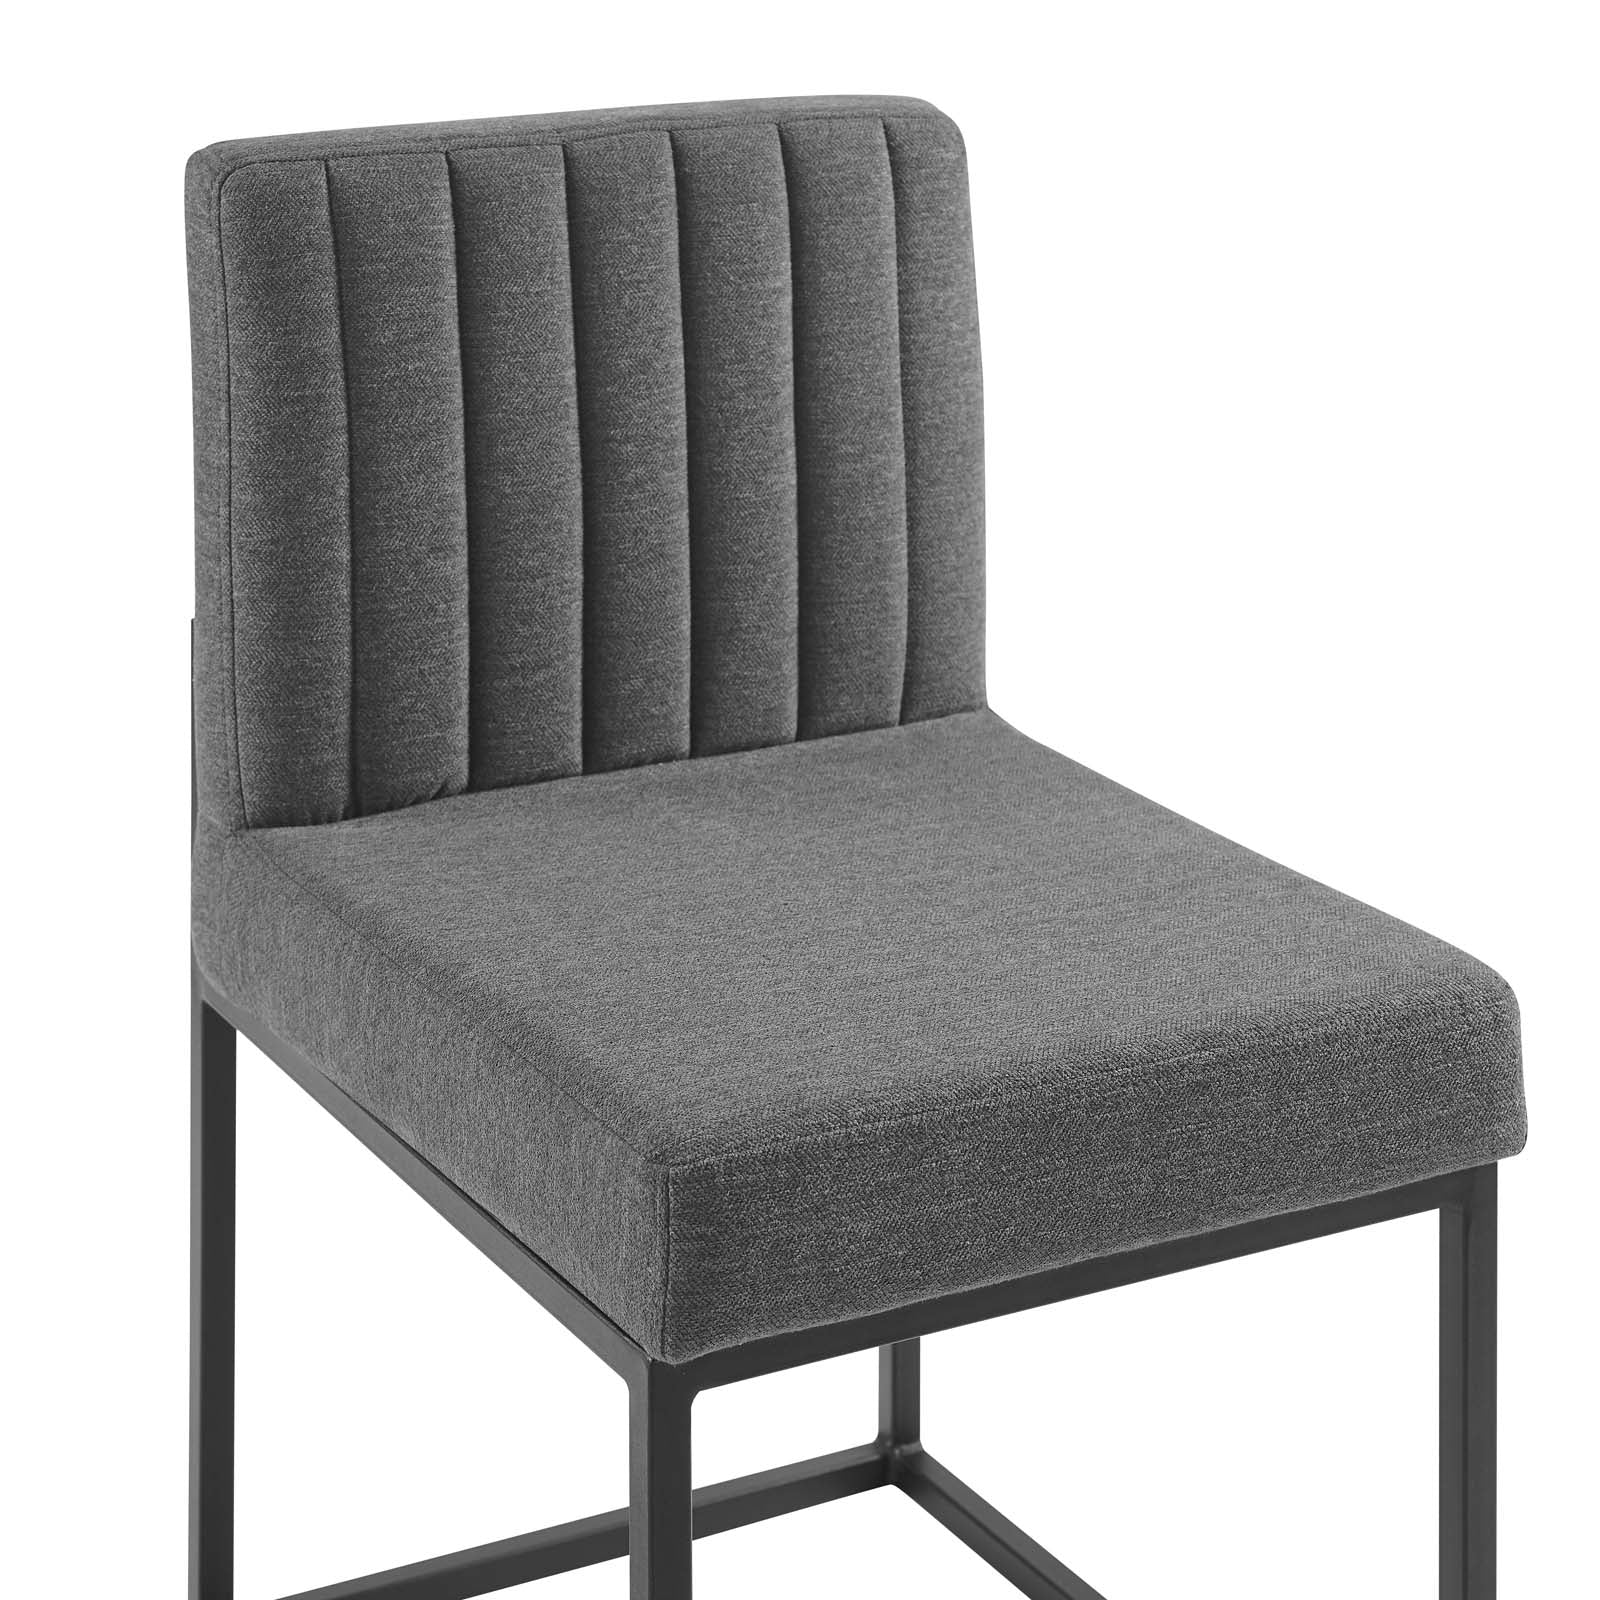 Carriage Channel Tufted Sled Base Upholstered Fabric Dining Chair - East Shore Modern Home Furnishings